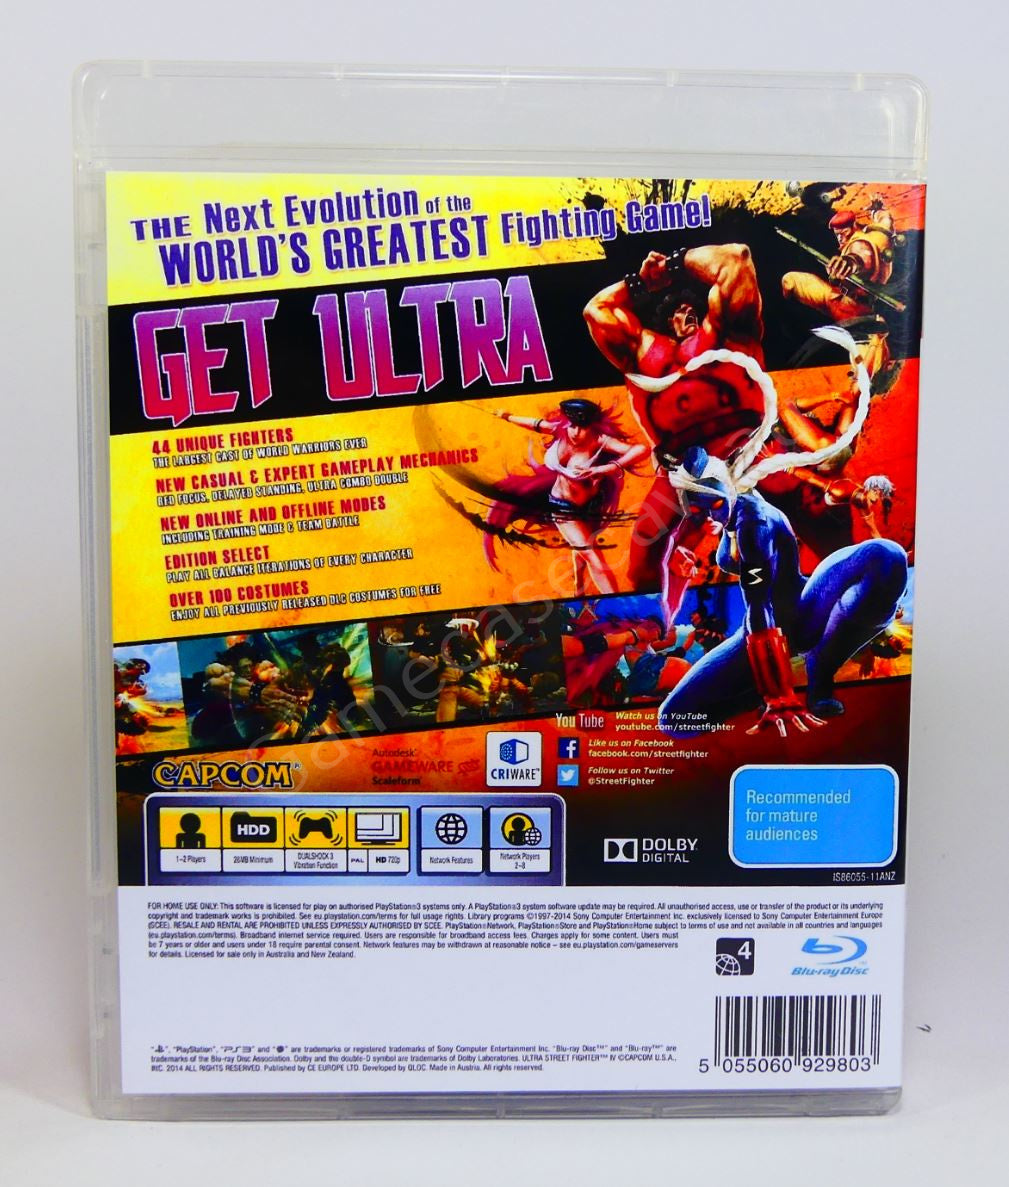 Ultra Street Fighter IV - PS3 Replacement Case